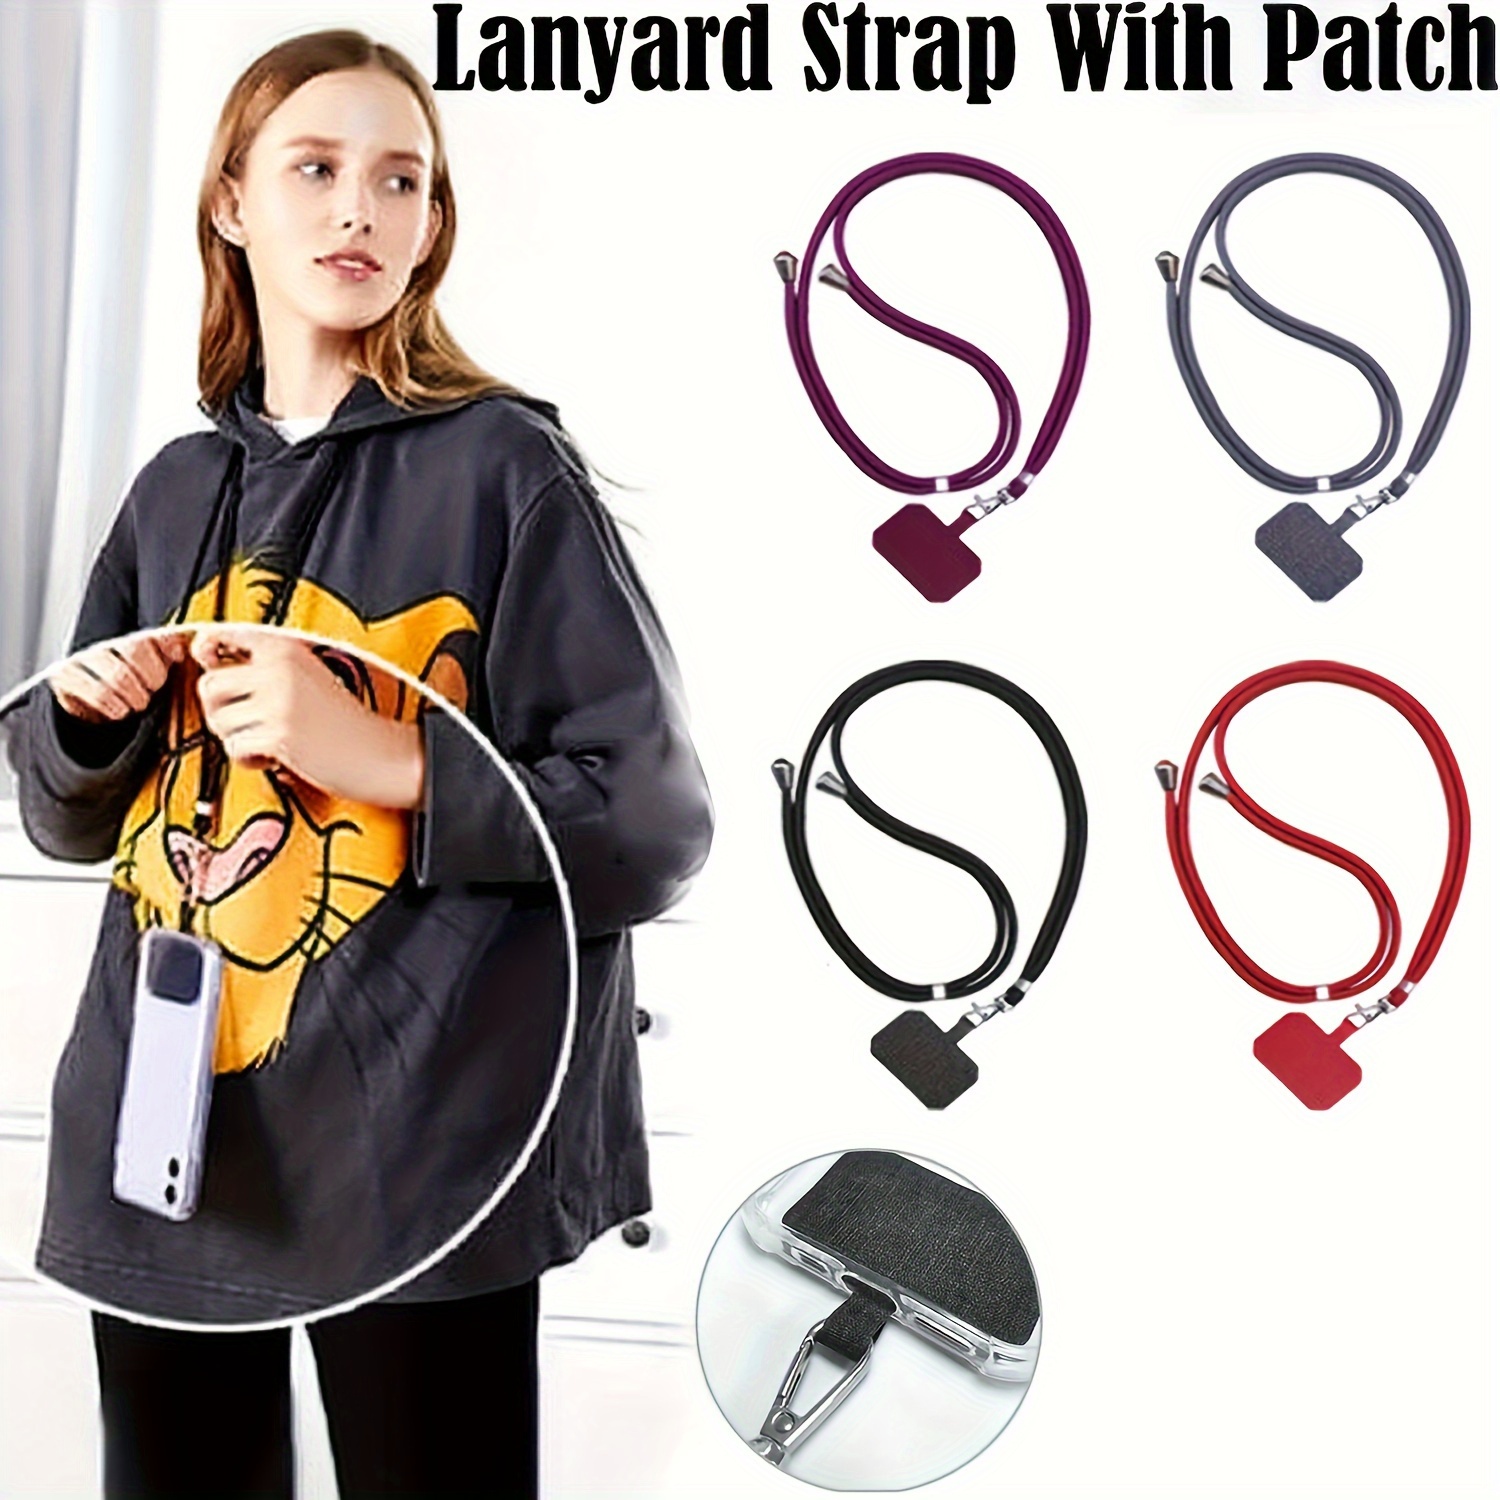 

Universal Adjustable Phone Lanyard Strap Mobile Phone Hanging Rope Neck Straps With Patch Anti-lost Lanyards Cell Phone Accessories